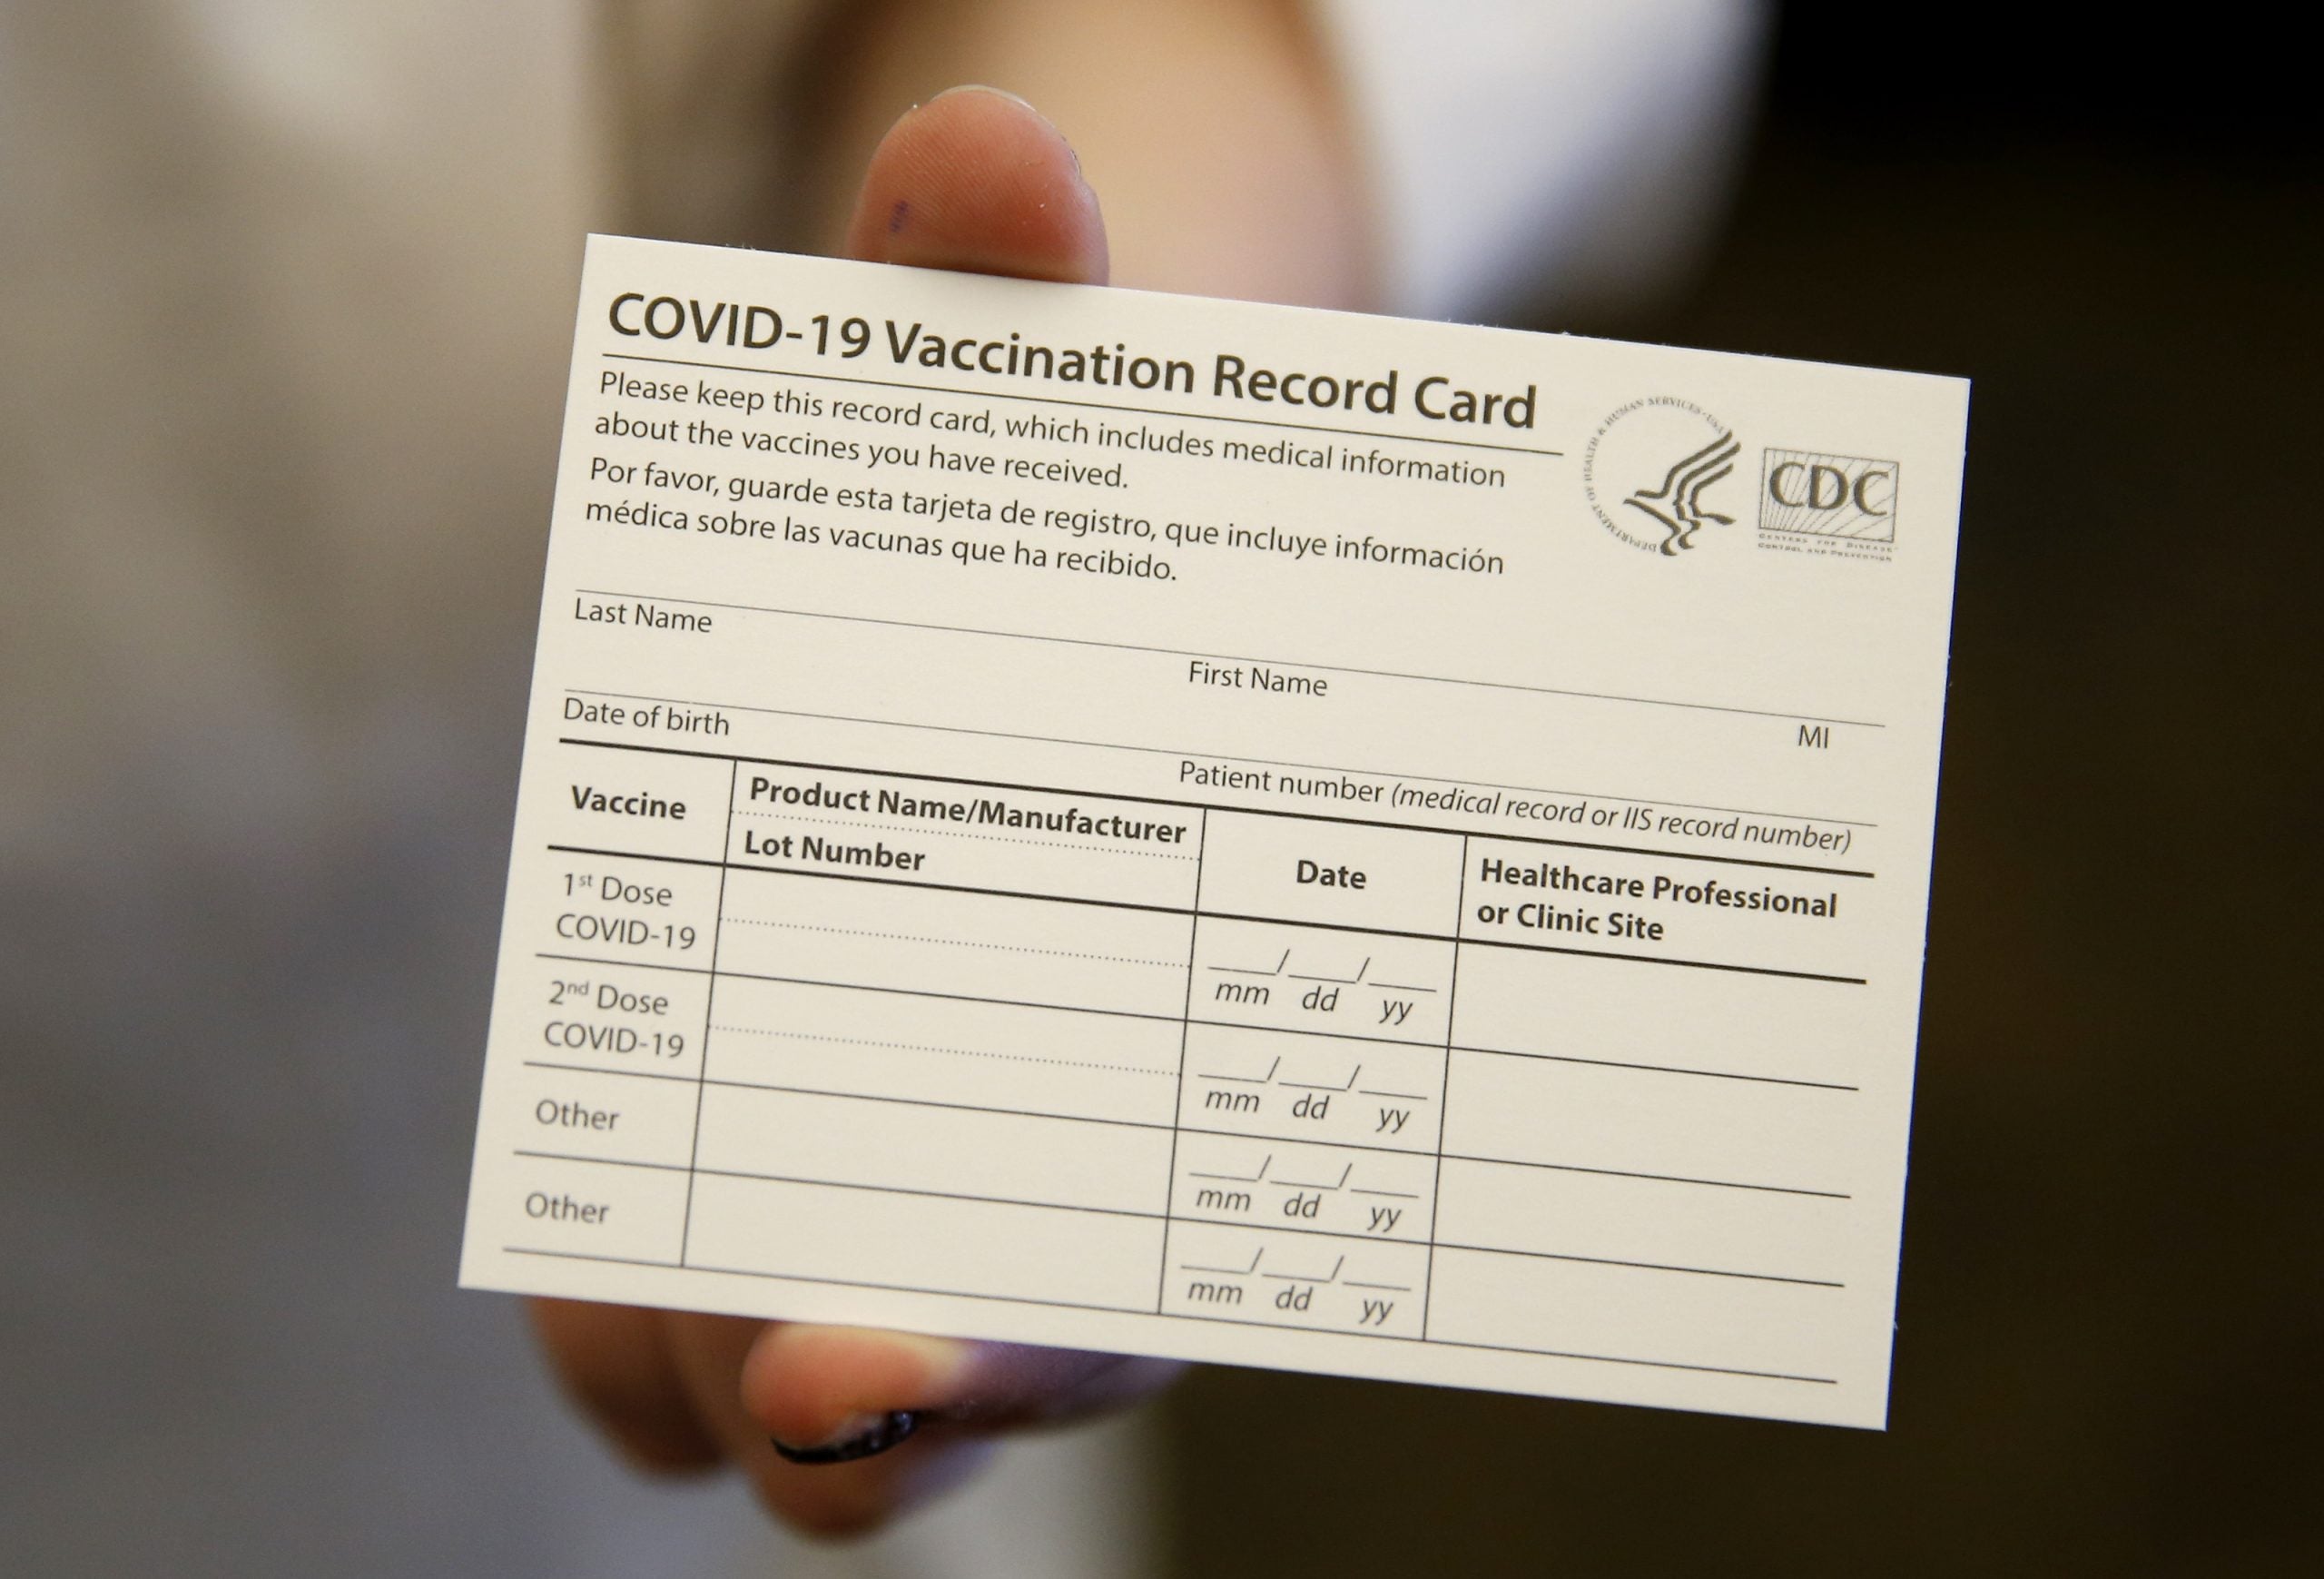 What if you lose your COVID-19 vaccine card?